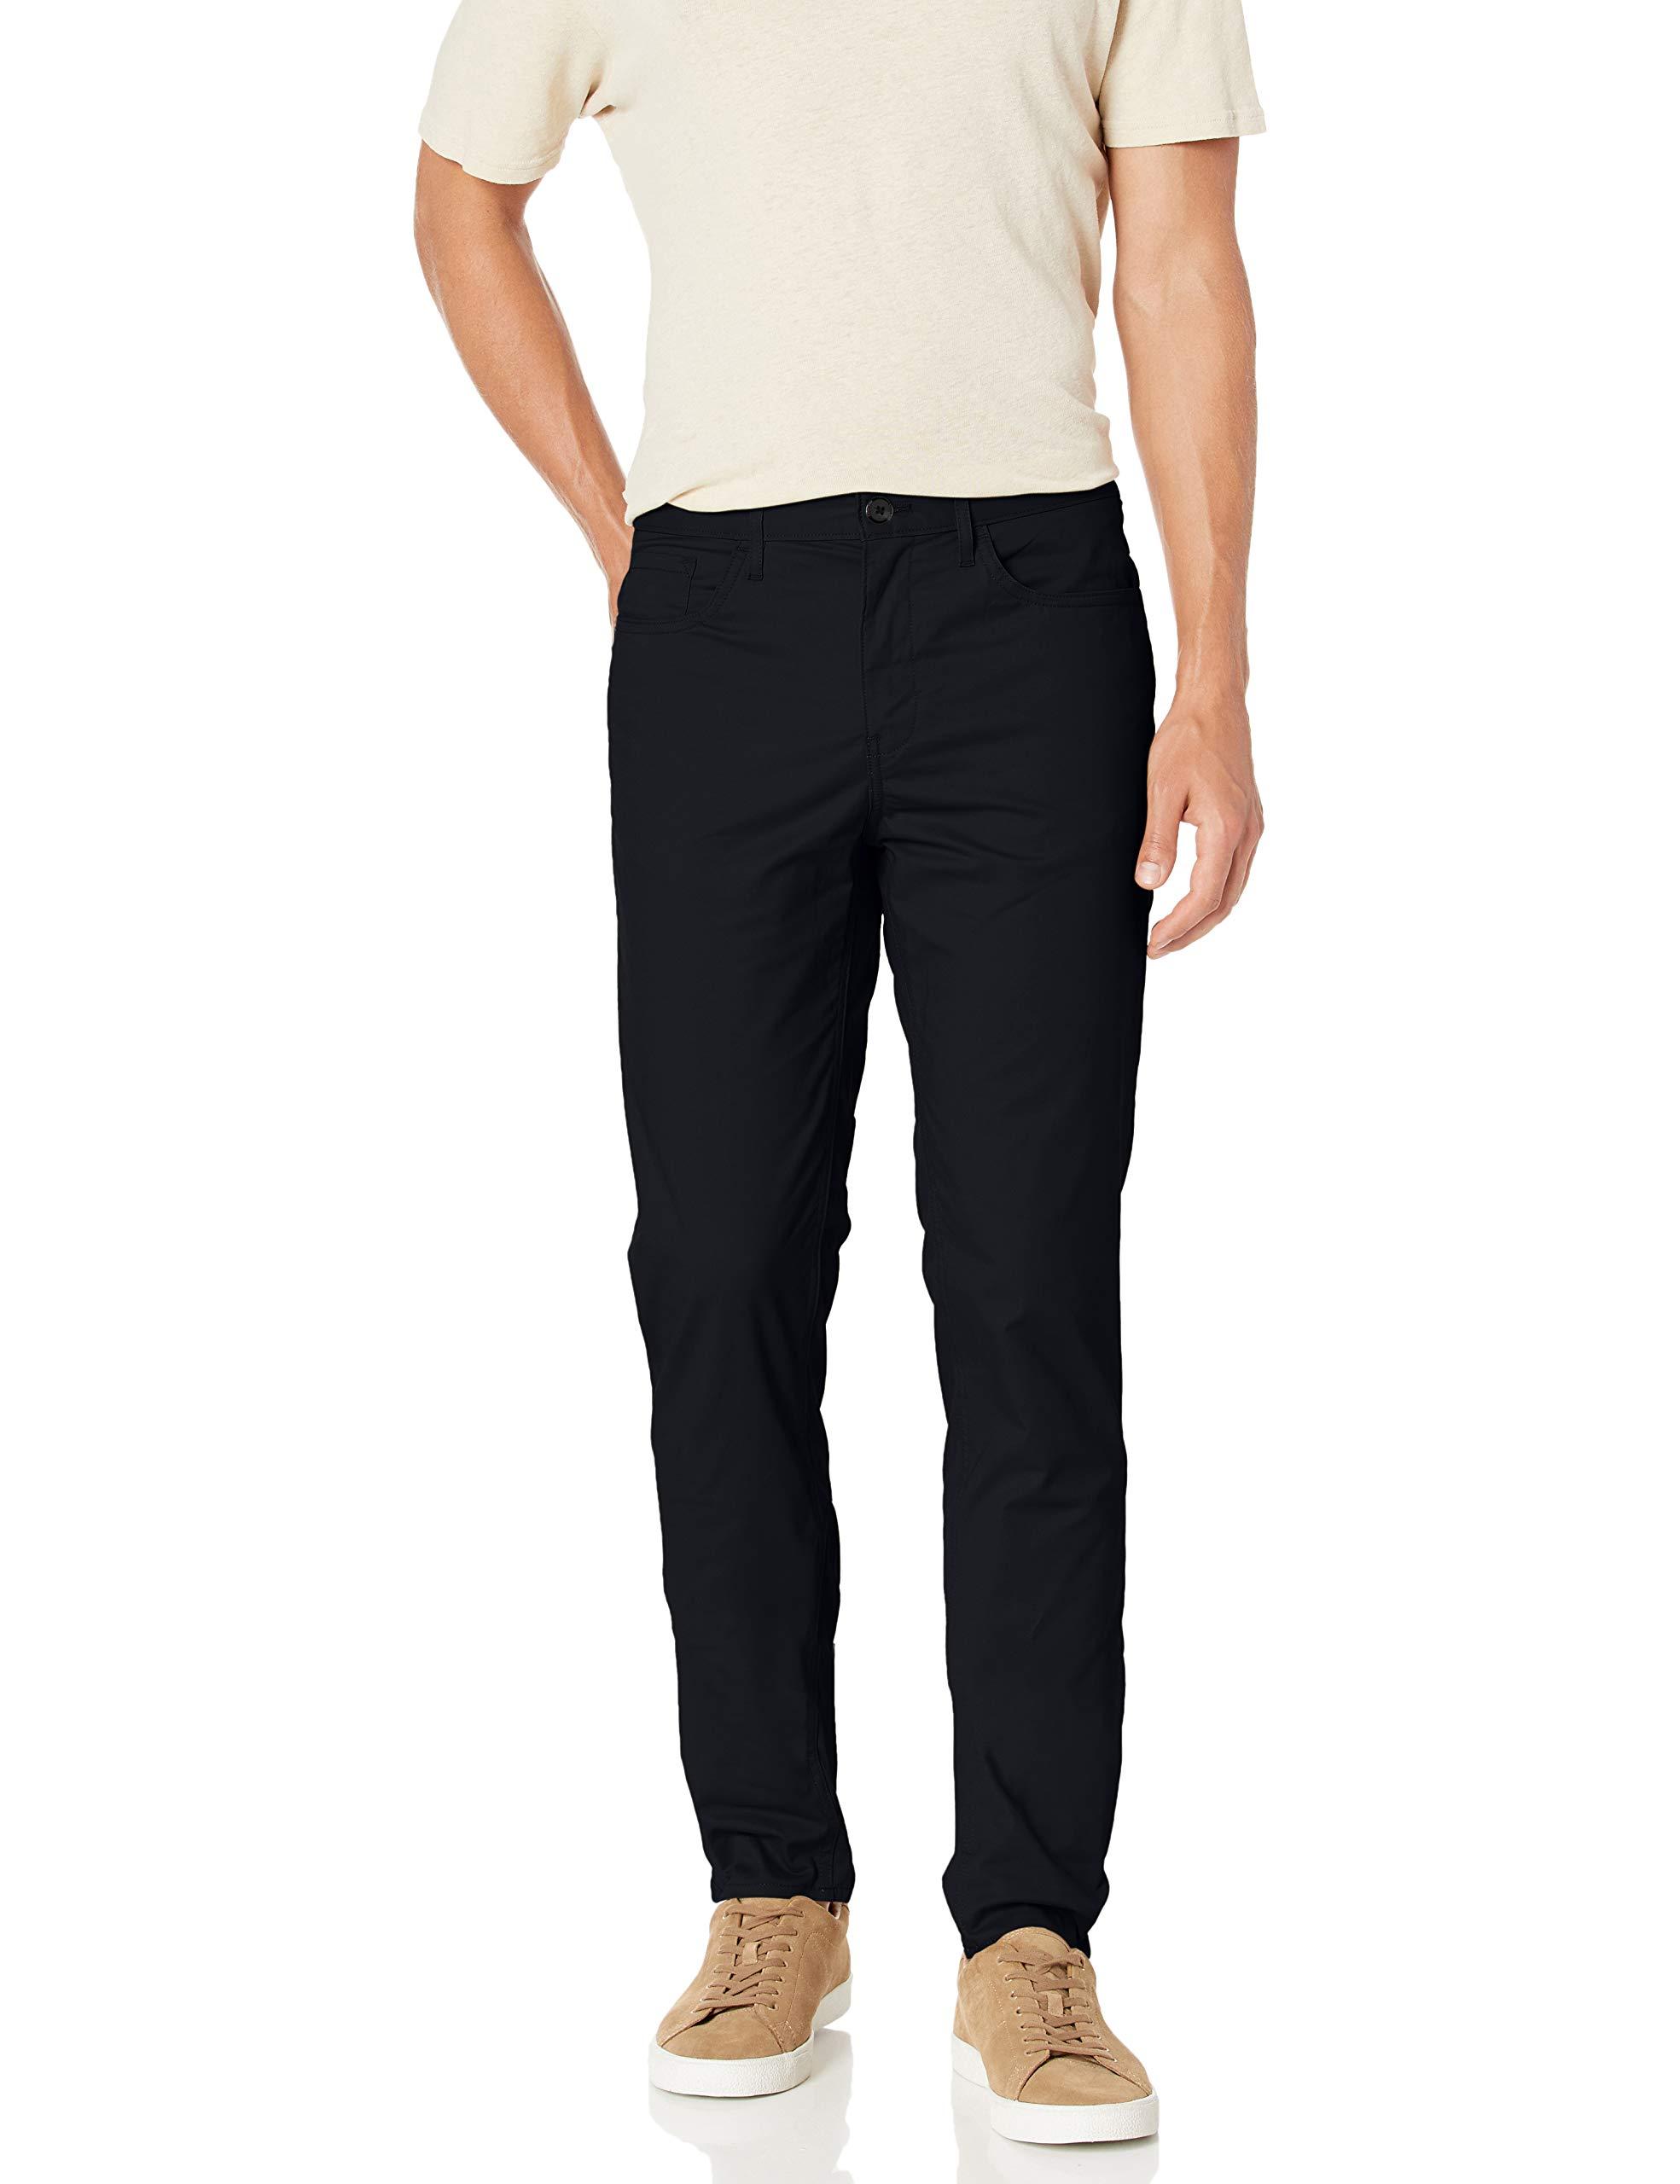 Calvin Klein Skinny Stretch Sateen Casual Pants in White for Men - Lyst